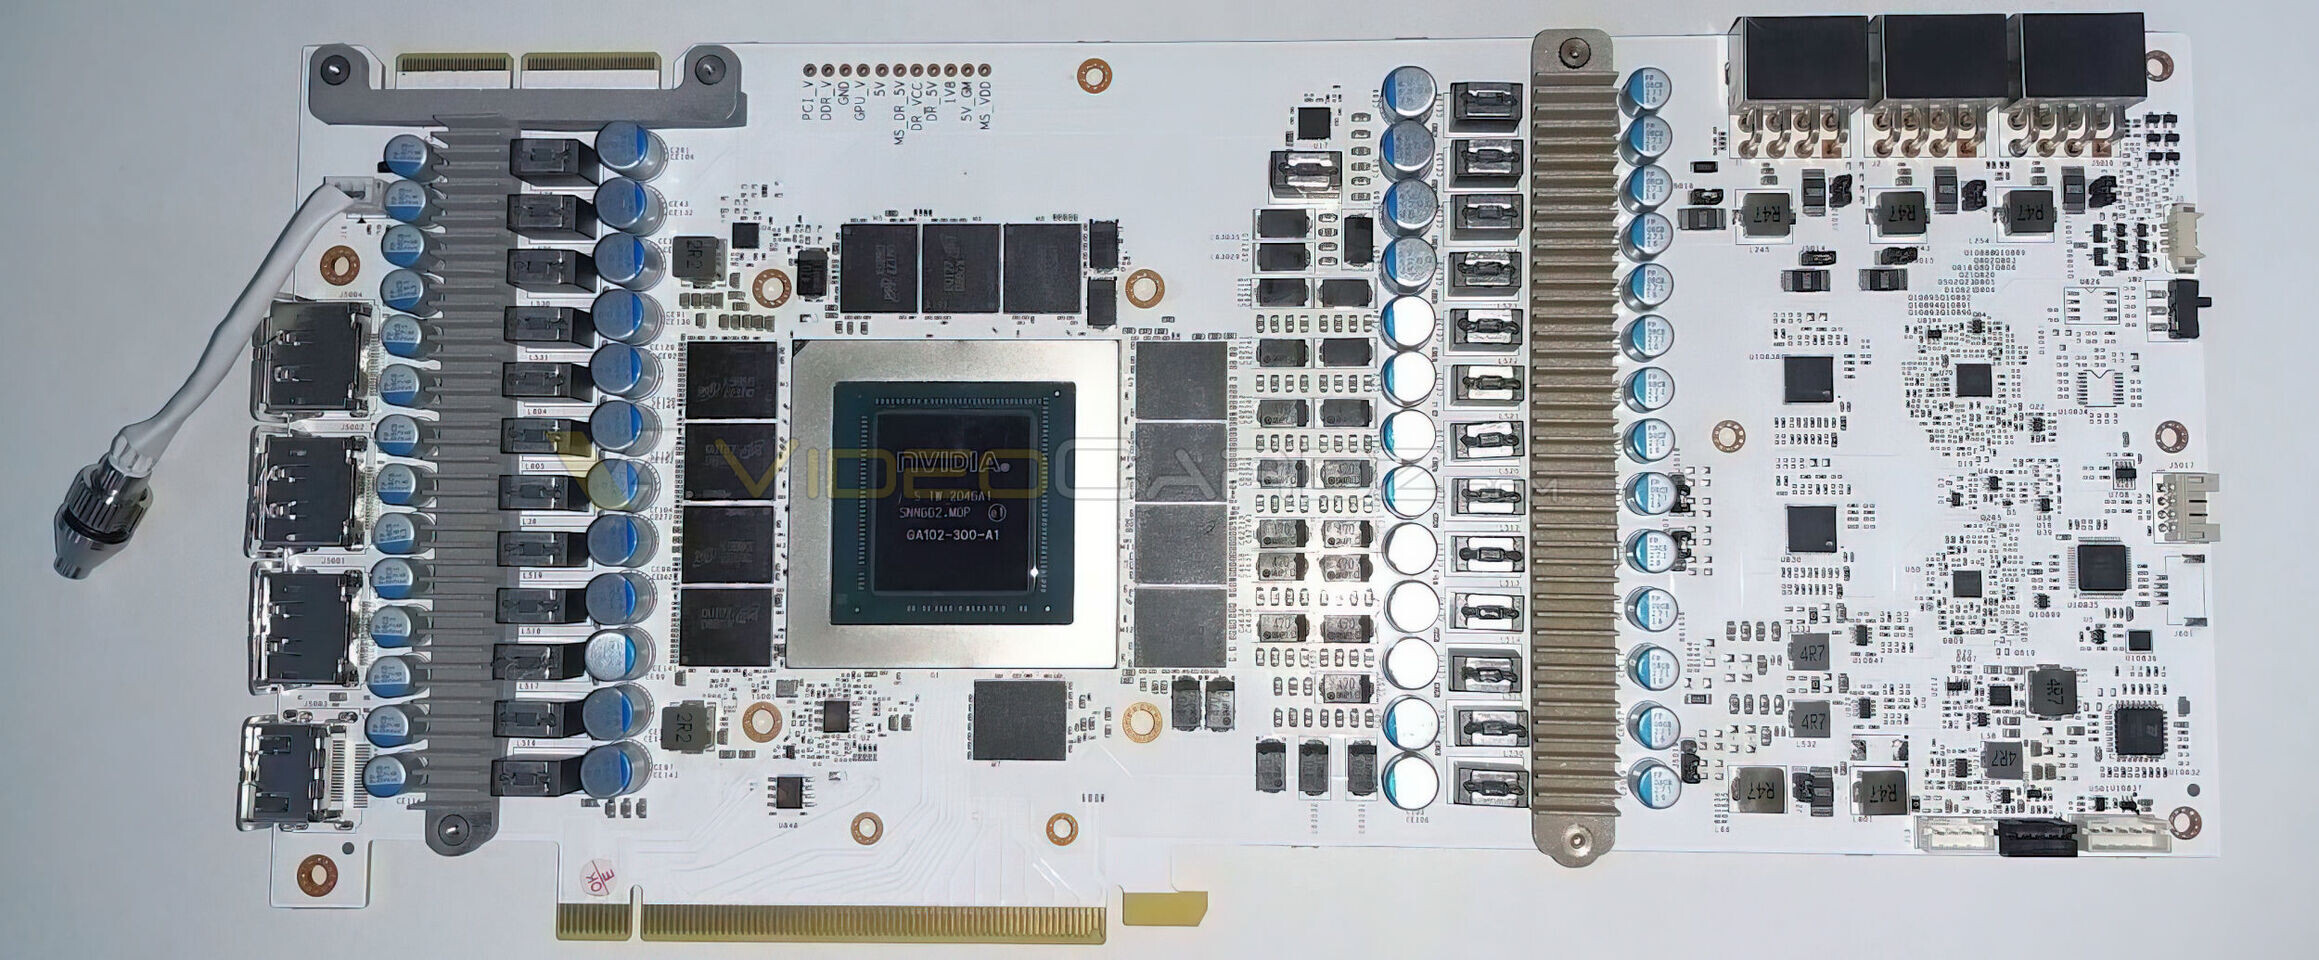 Media asset in full size related to 3dfxzone.it news item entitled as follows: Foto del PCB della video card GeForce RTX 3090 Hall Of Fame (HOF) di GALAX | Image Name: news31603_GALAX-GeForce-RTX-3090-Hall-Of-Fame_1.jpg